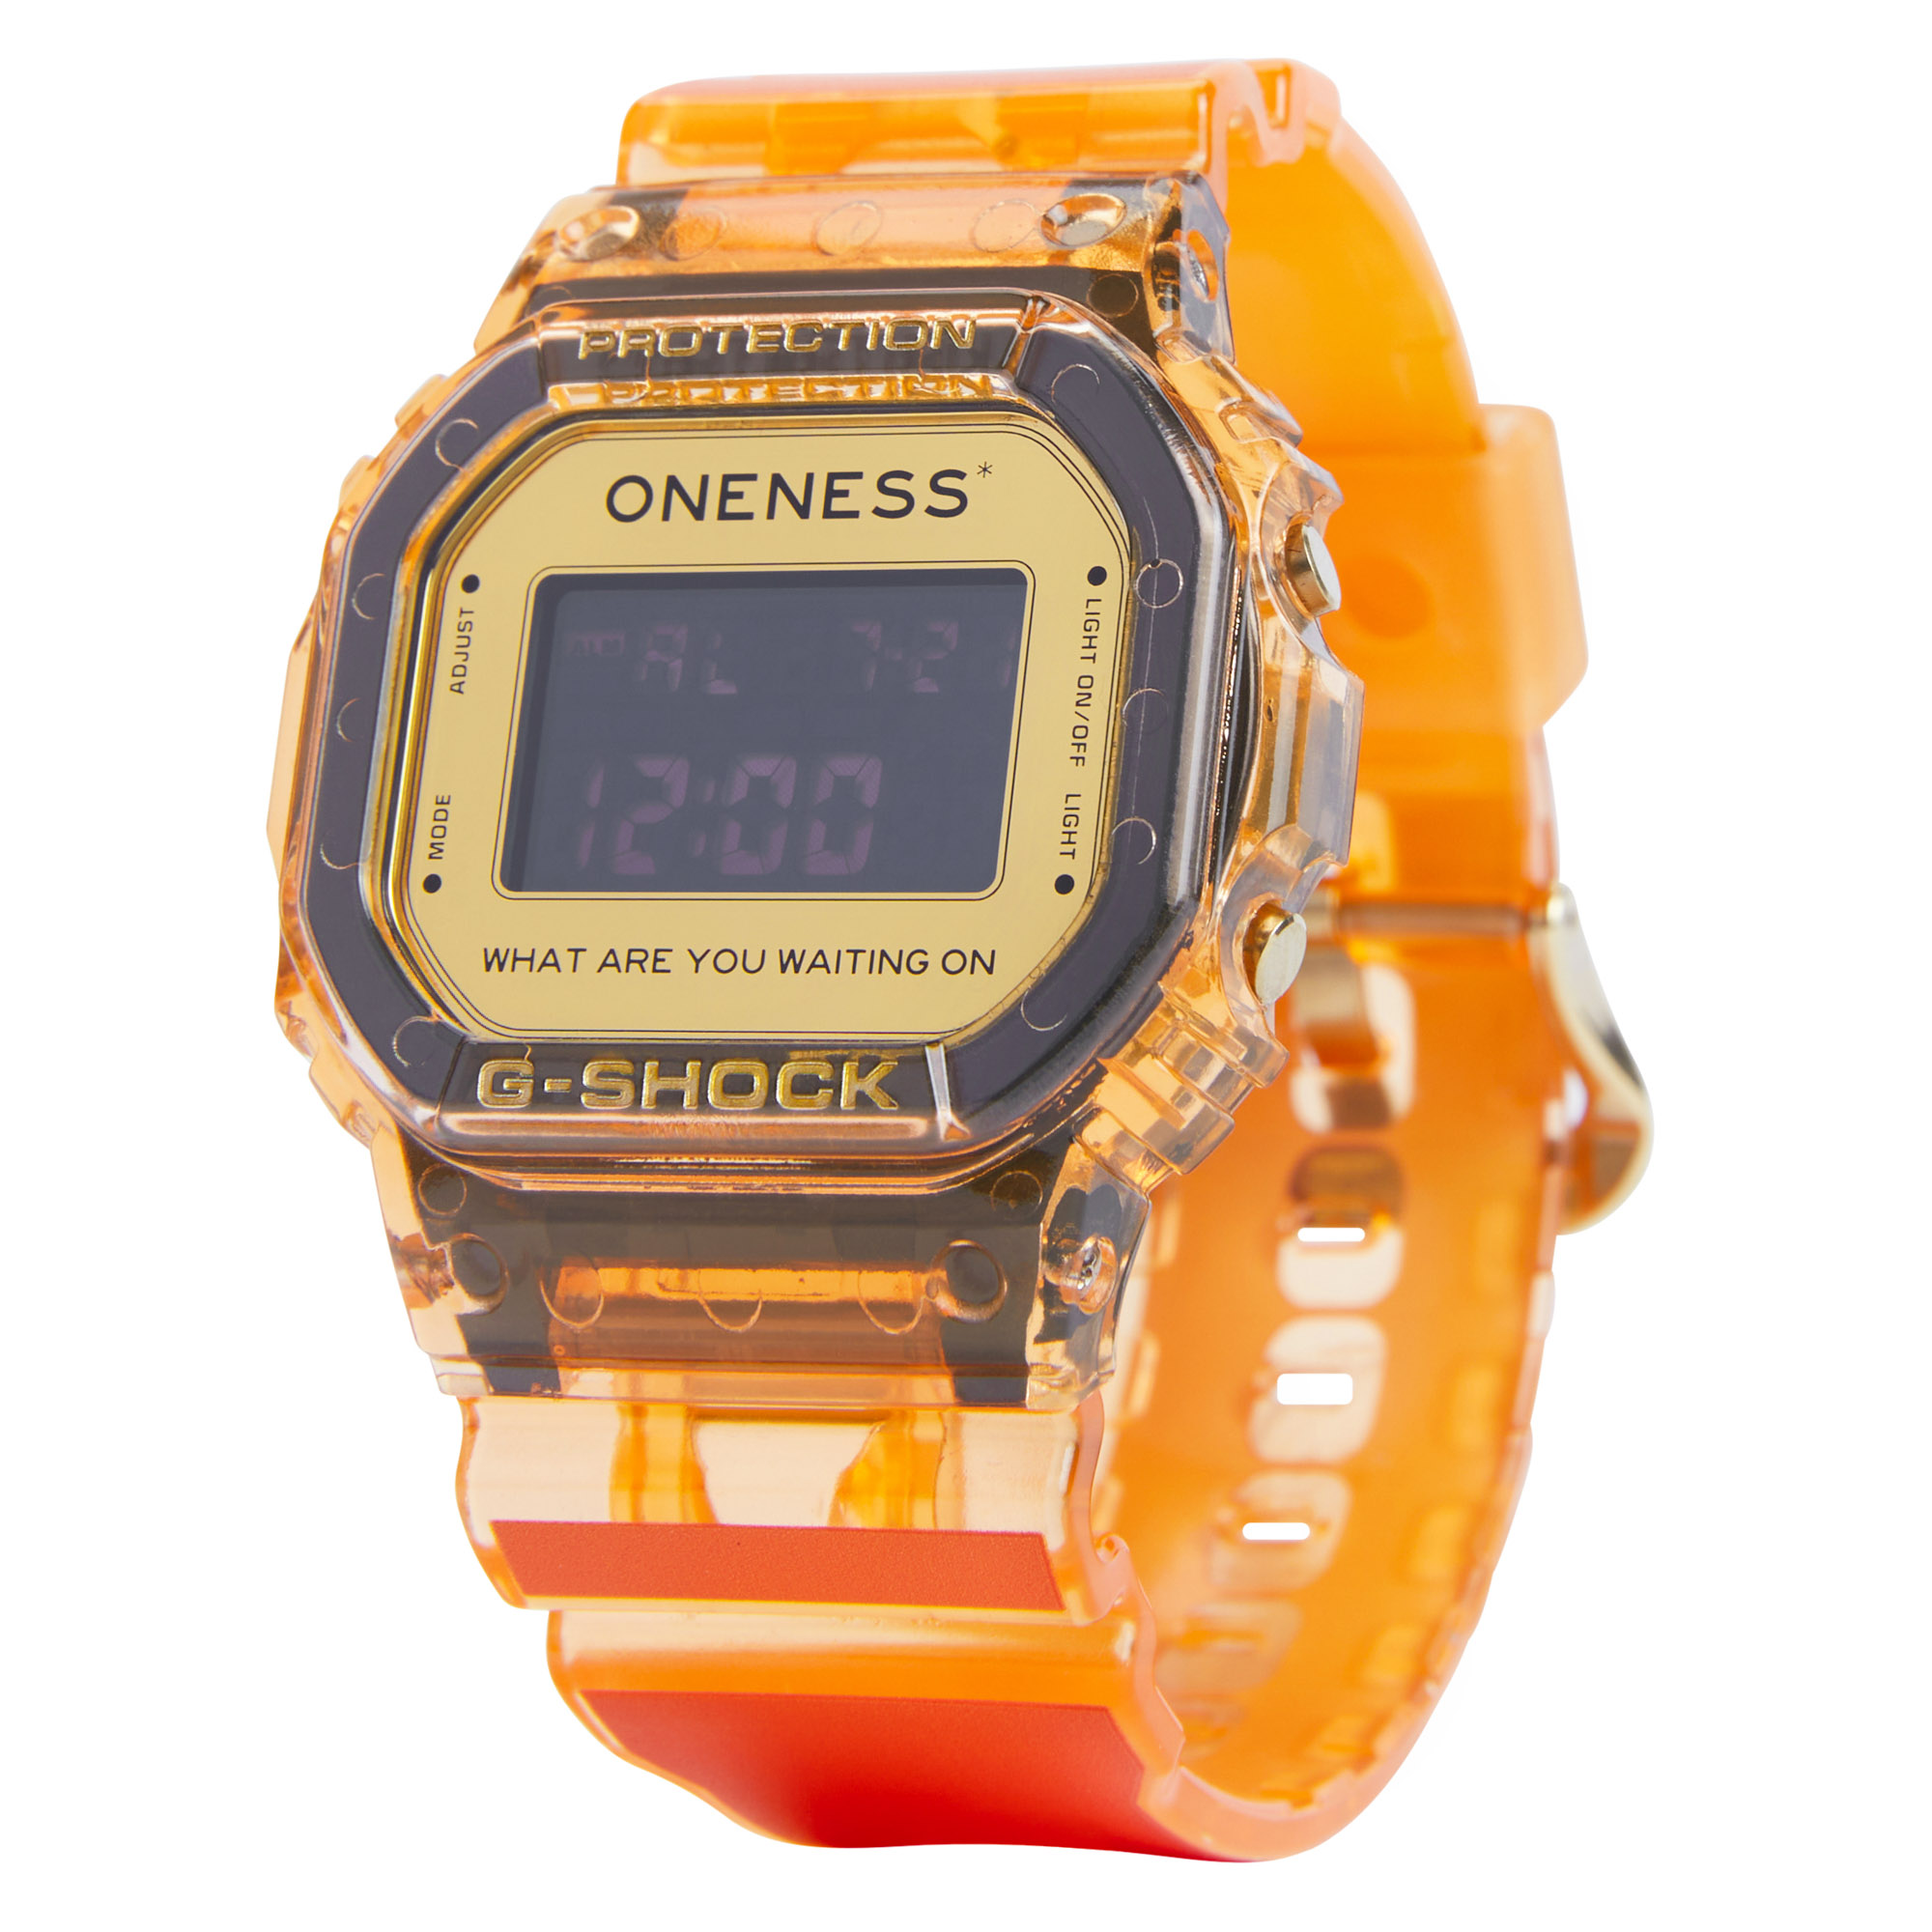 G-SHOCK x Oneness DW-5600 Collaboration Release